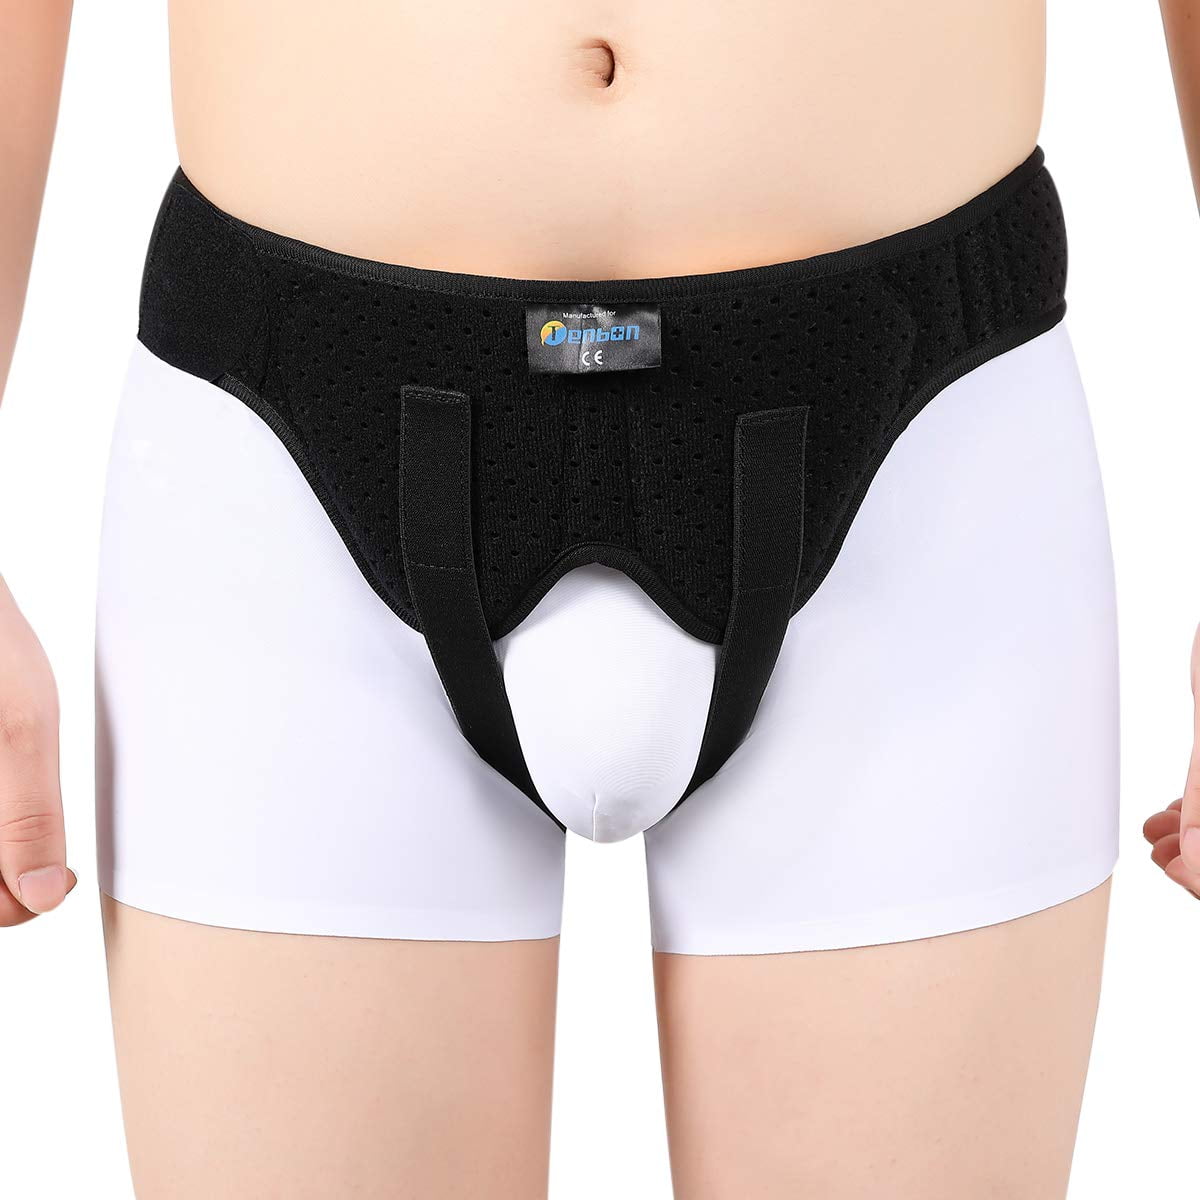 DR FRANKLYN HERNIA SUPPORT BRIEF UNDERWEAR WITH SUPPORT BELT Size SMALL